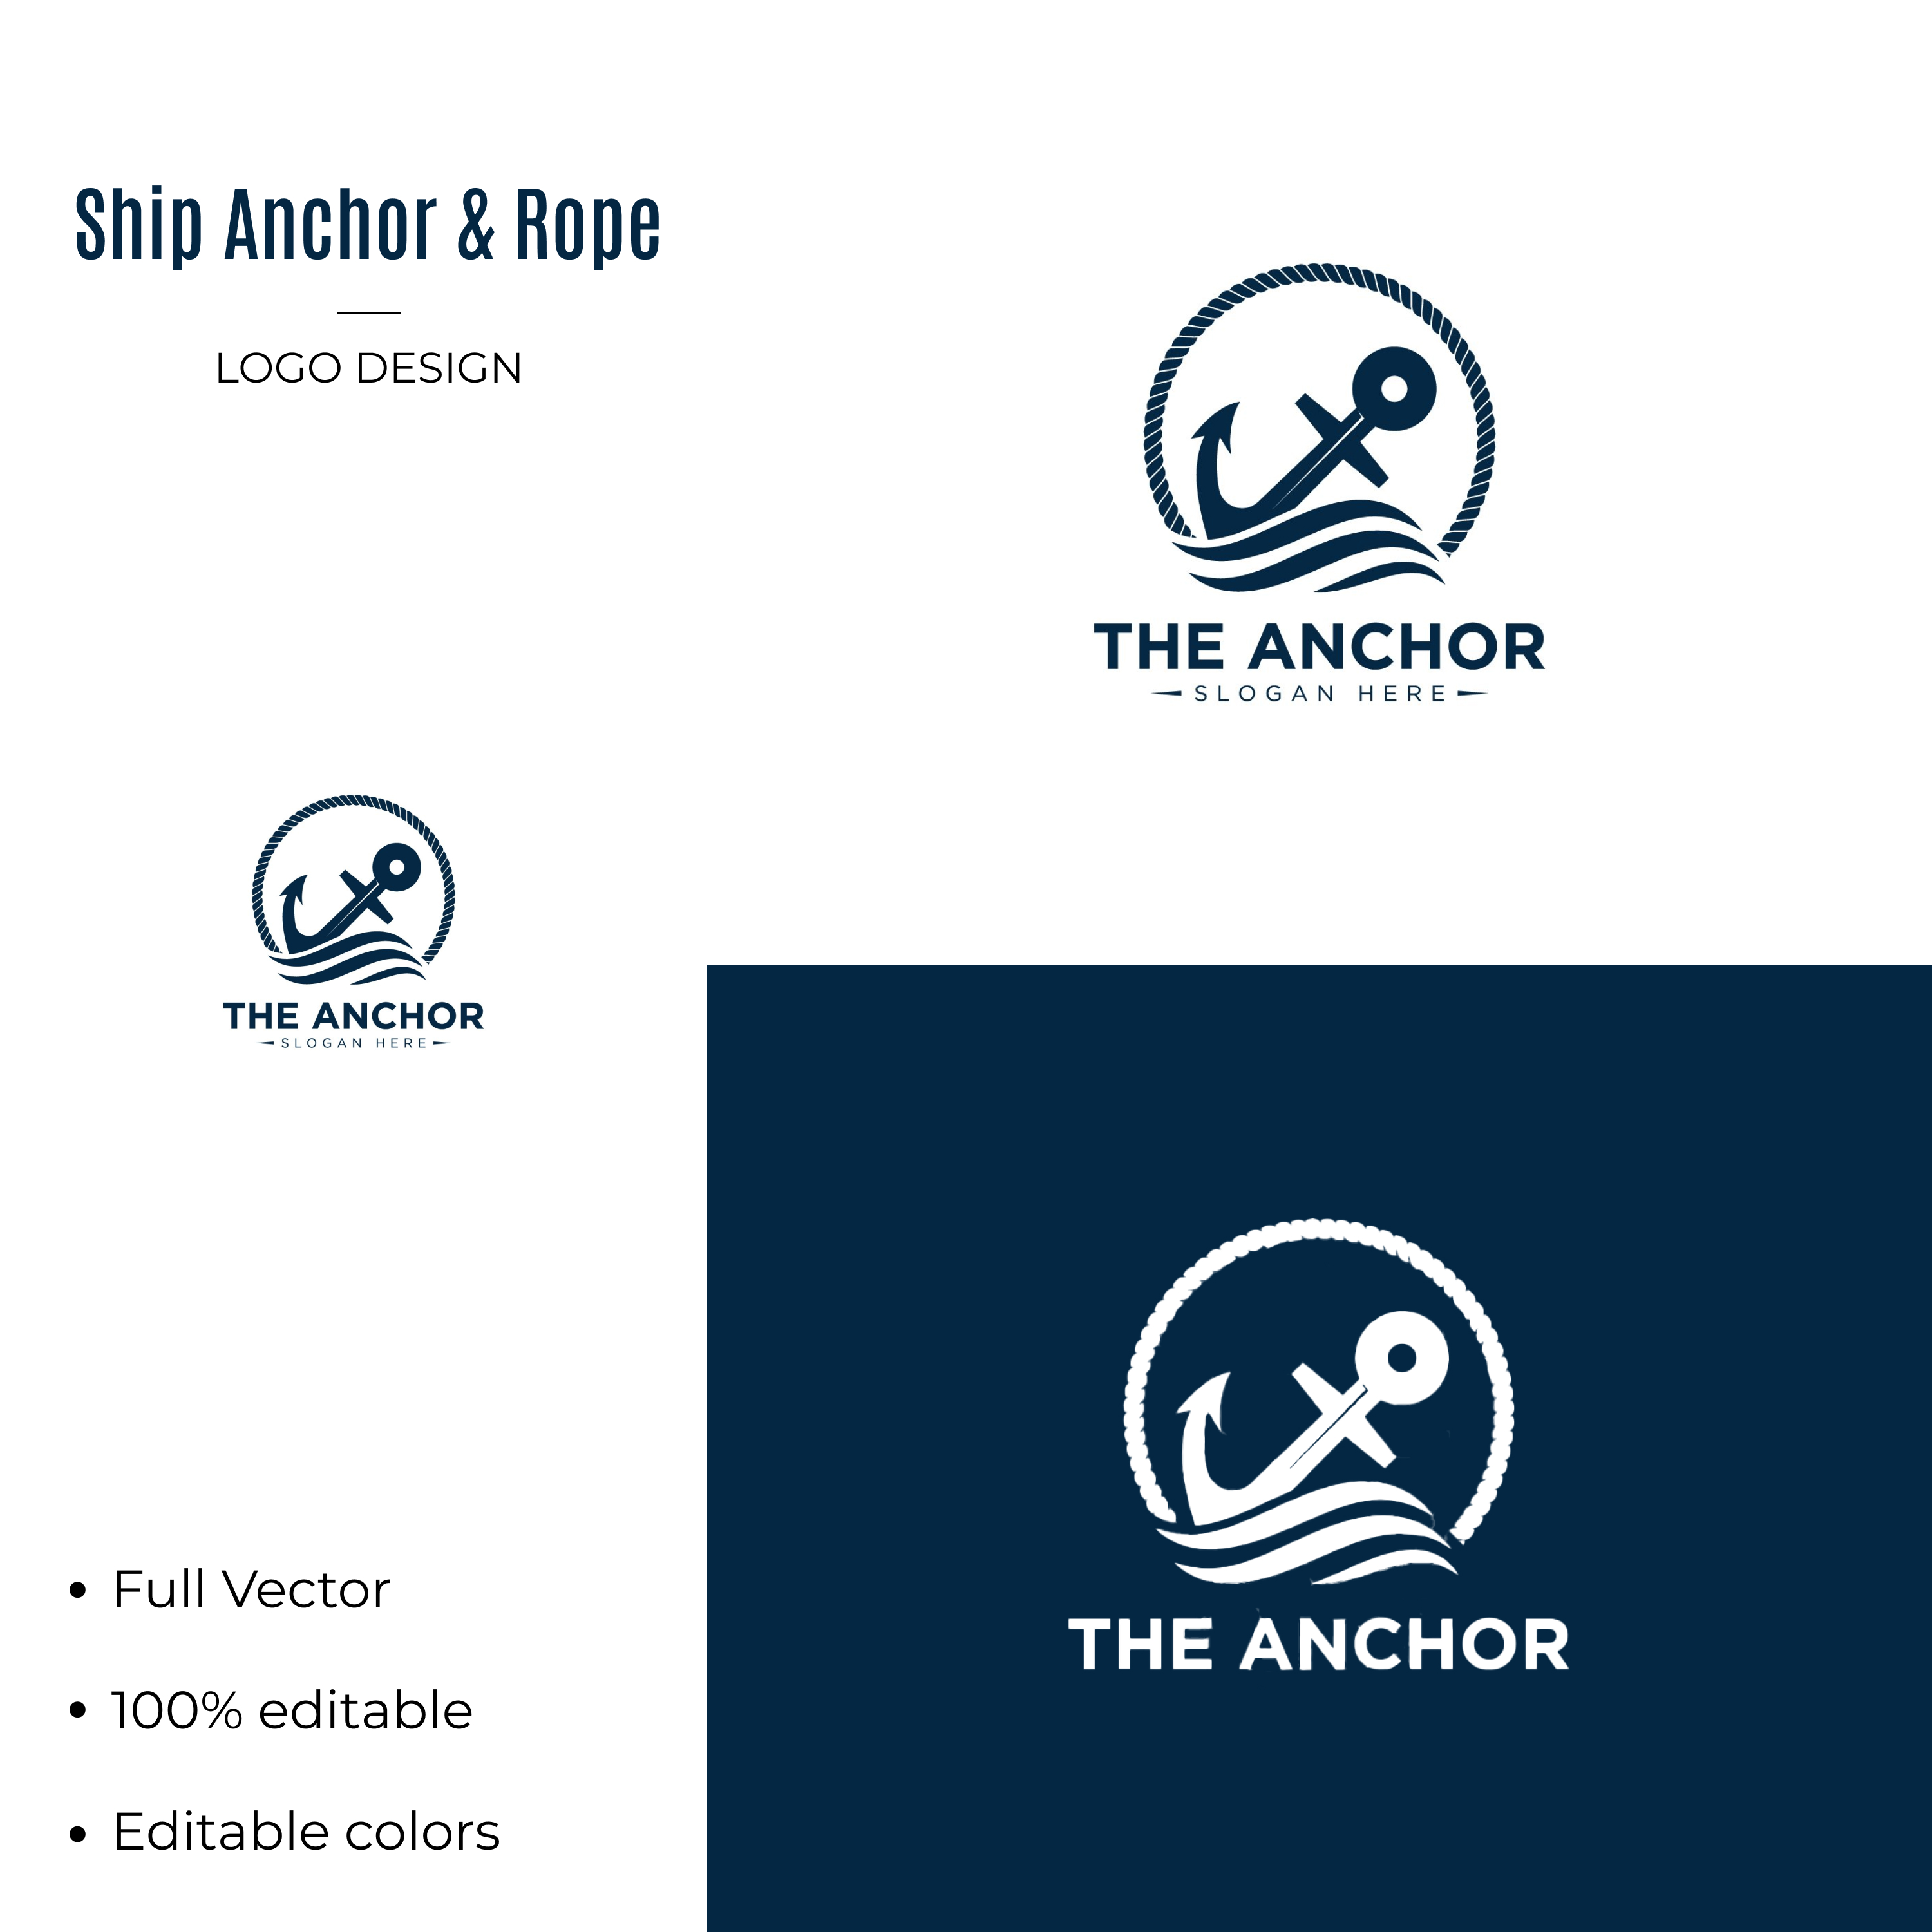 Ship Anchor and Rope Logo cover.